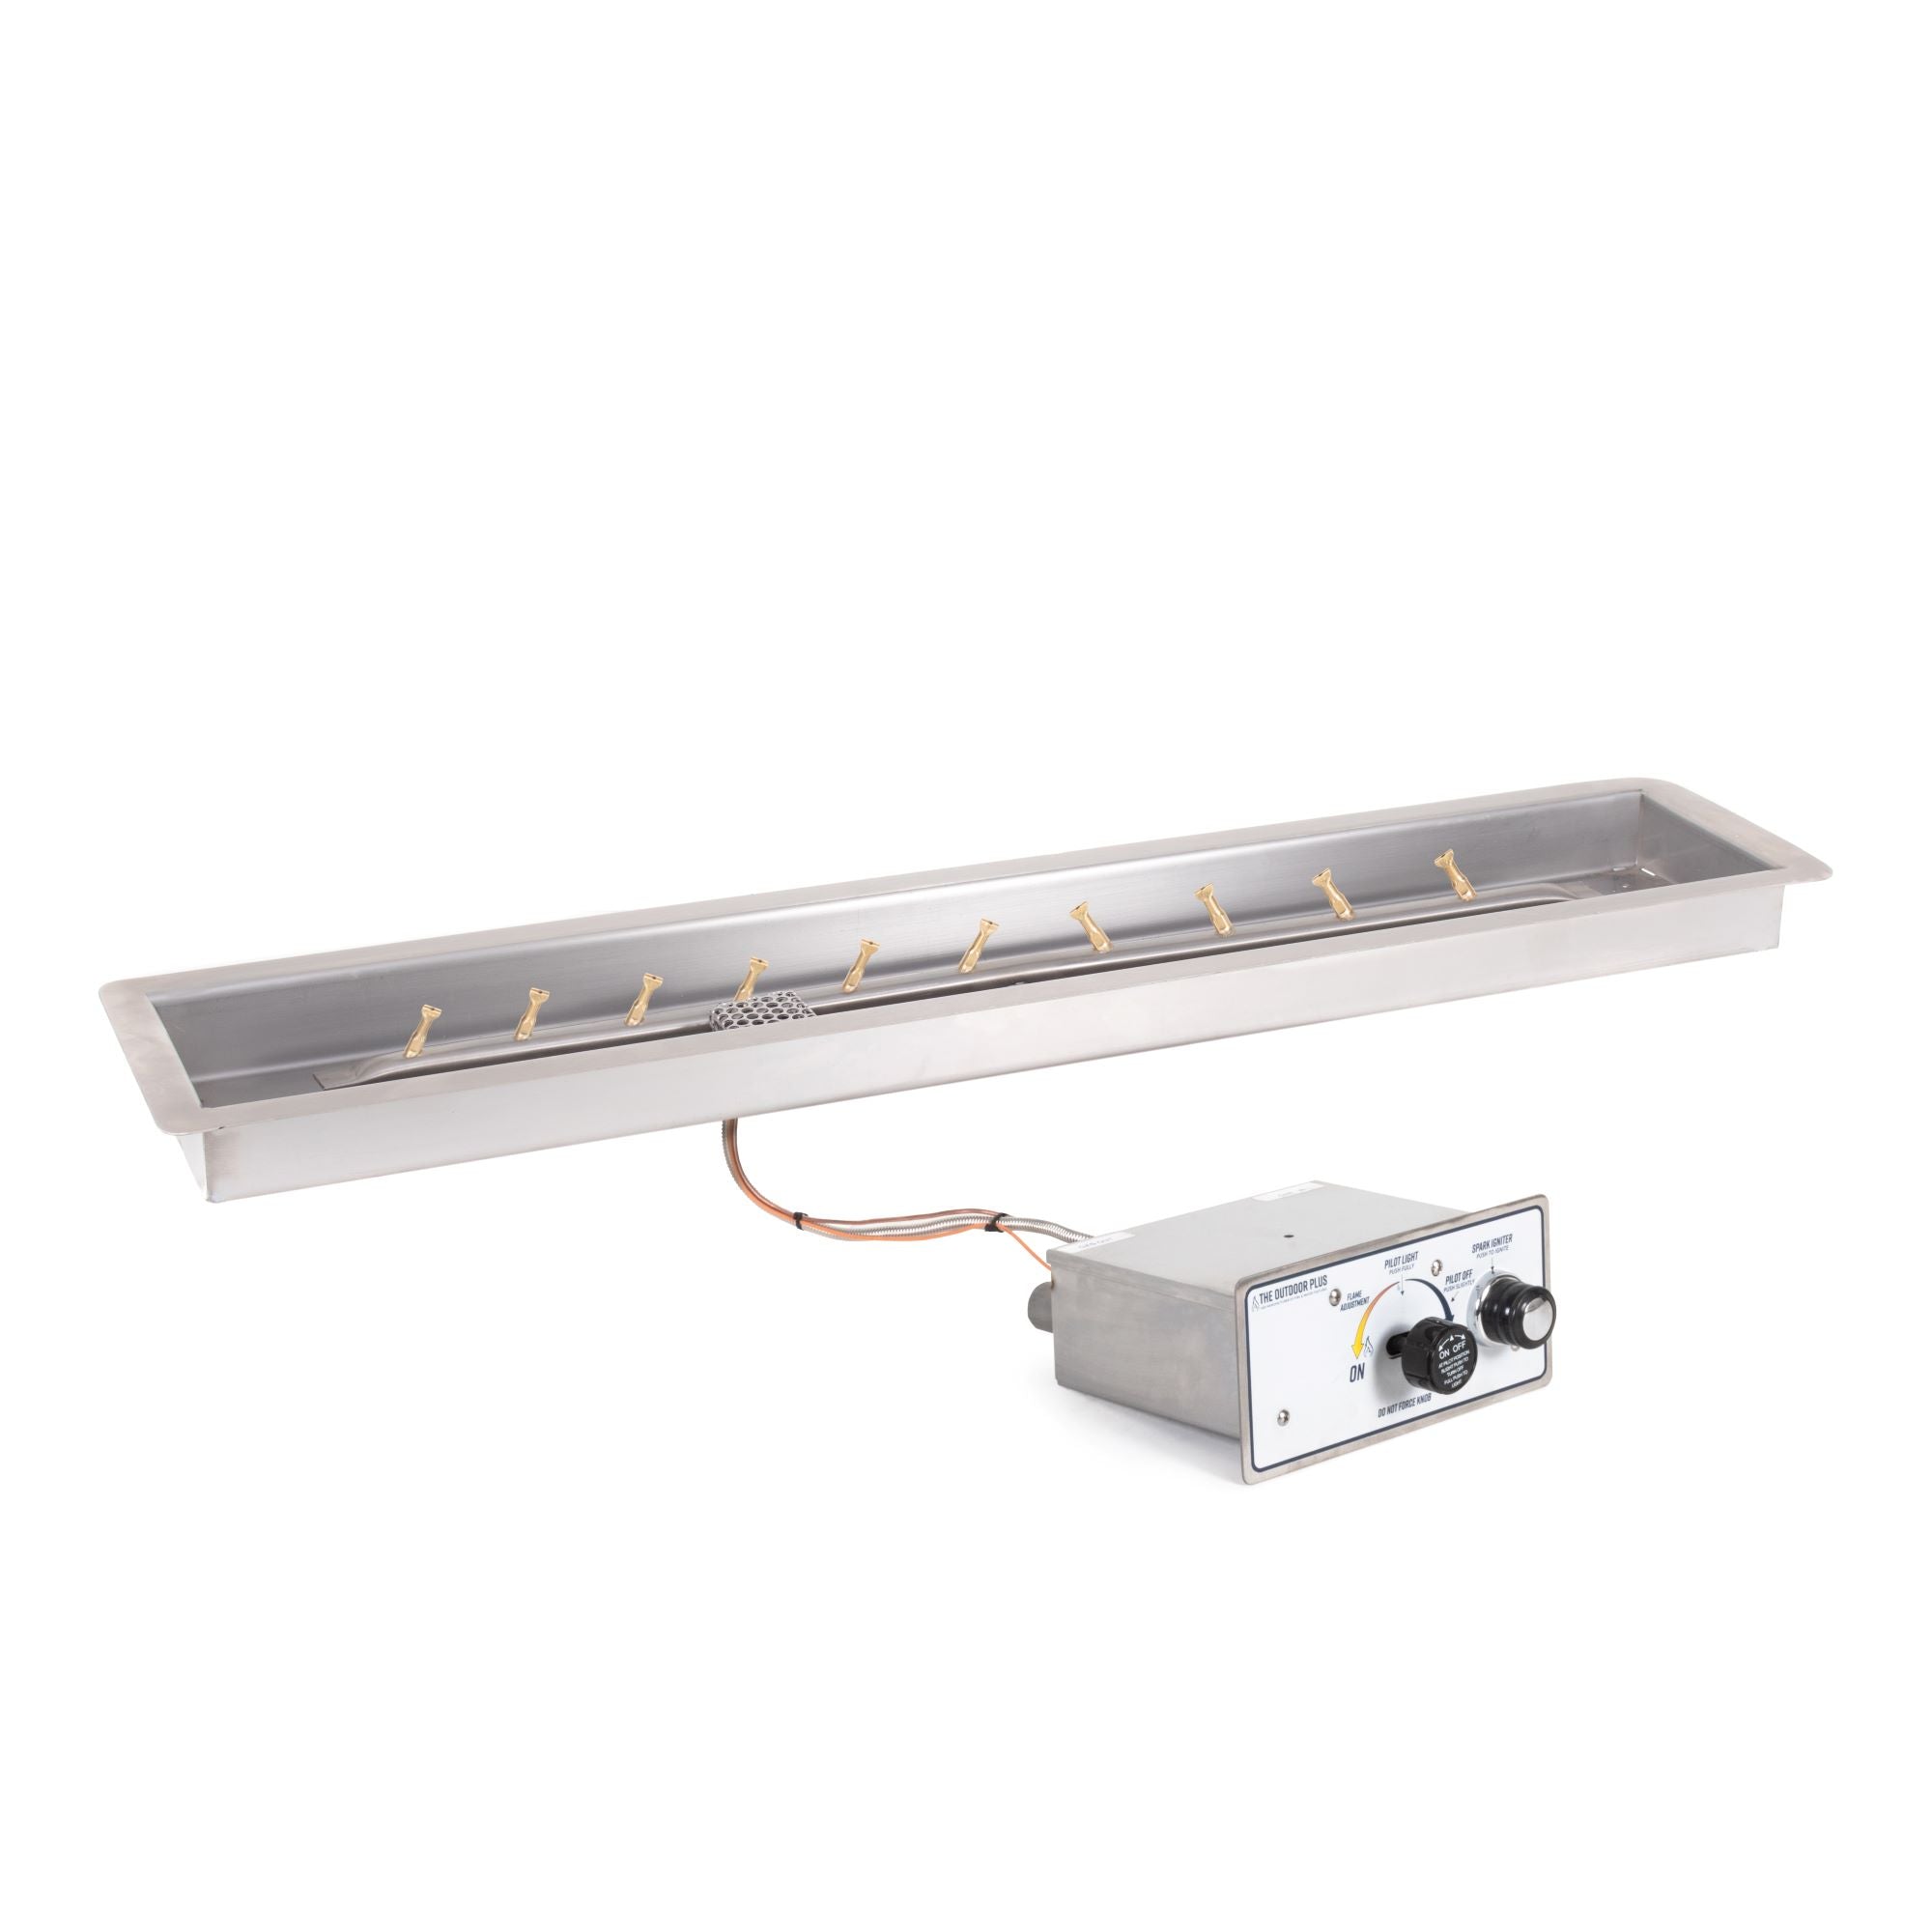 The Outdoor Plus Rectangular Drop-in Pan with Stainless Steel 'H' Bullet Burner